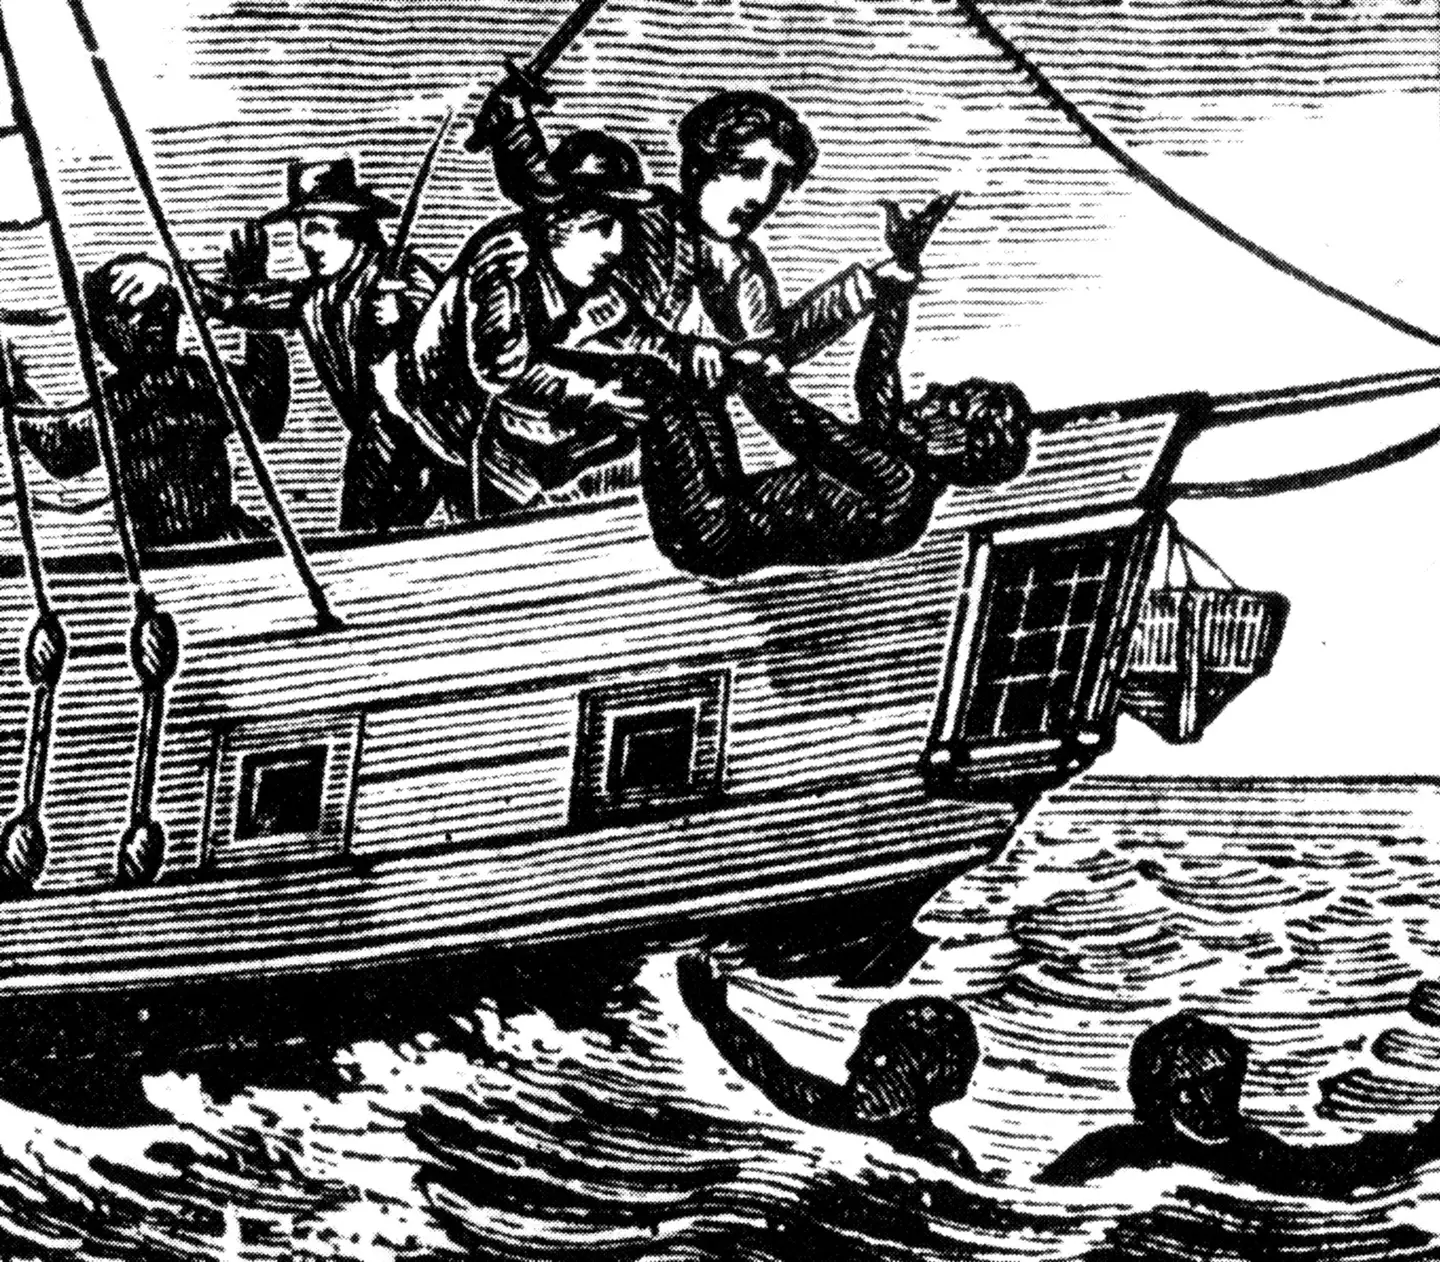 The slave trade was abolished in Britain in 1807. the mass-killing of African slaves in 1781 thrown overboard from the Zong trading ship (